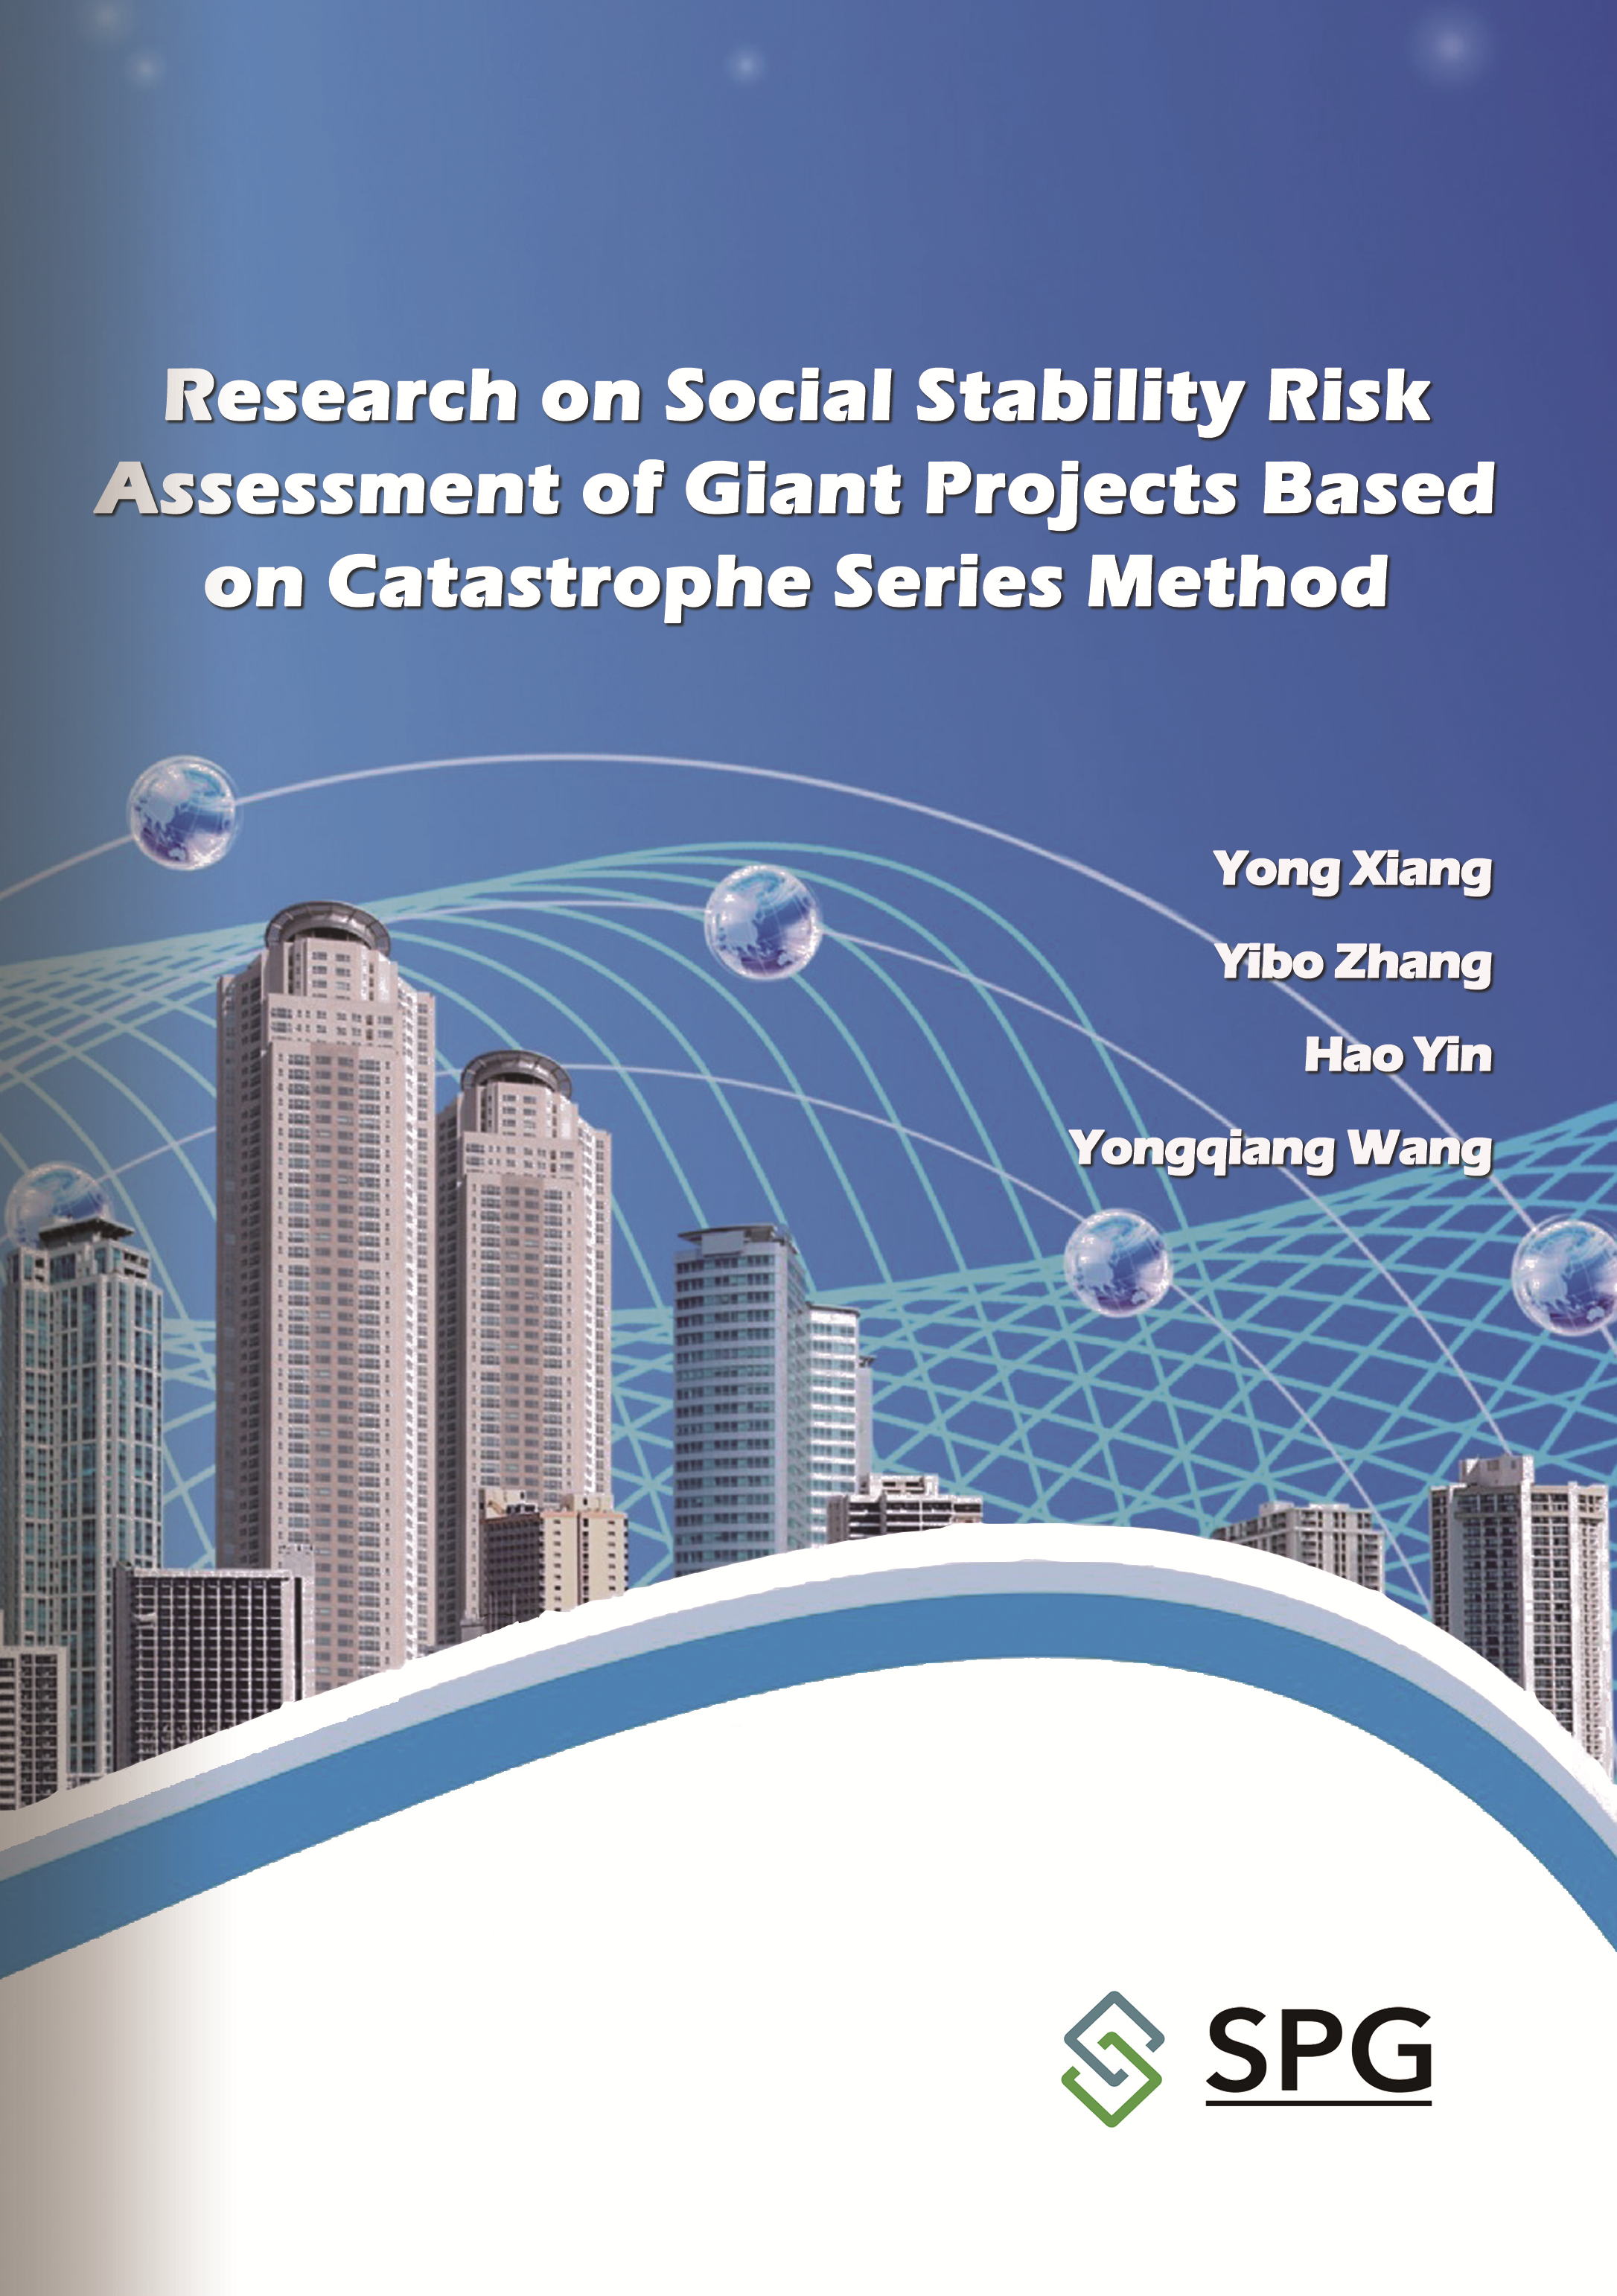 Research on Social Stability Risk Assessment of Giant Projects Based on Catastrophe Series Method | Scholar Publishing Group